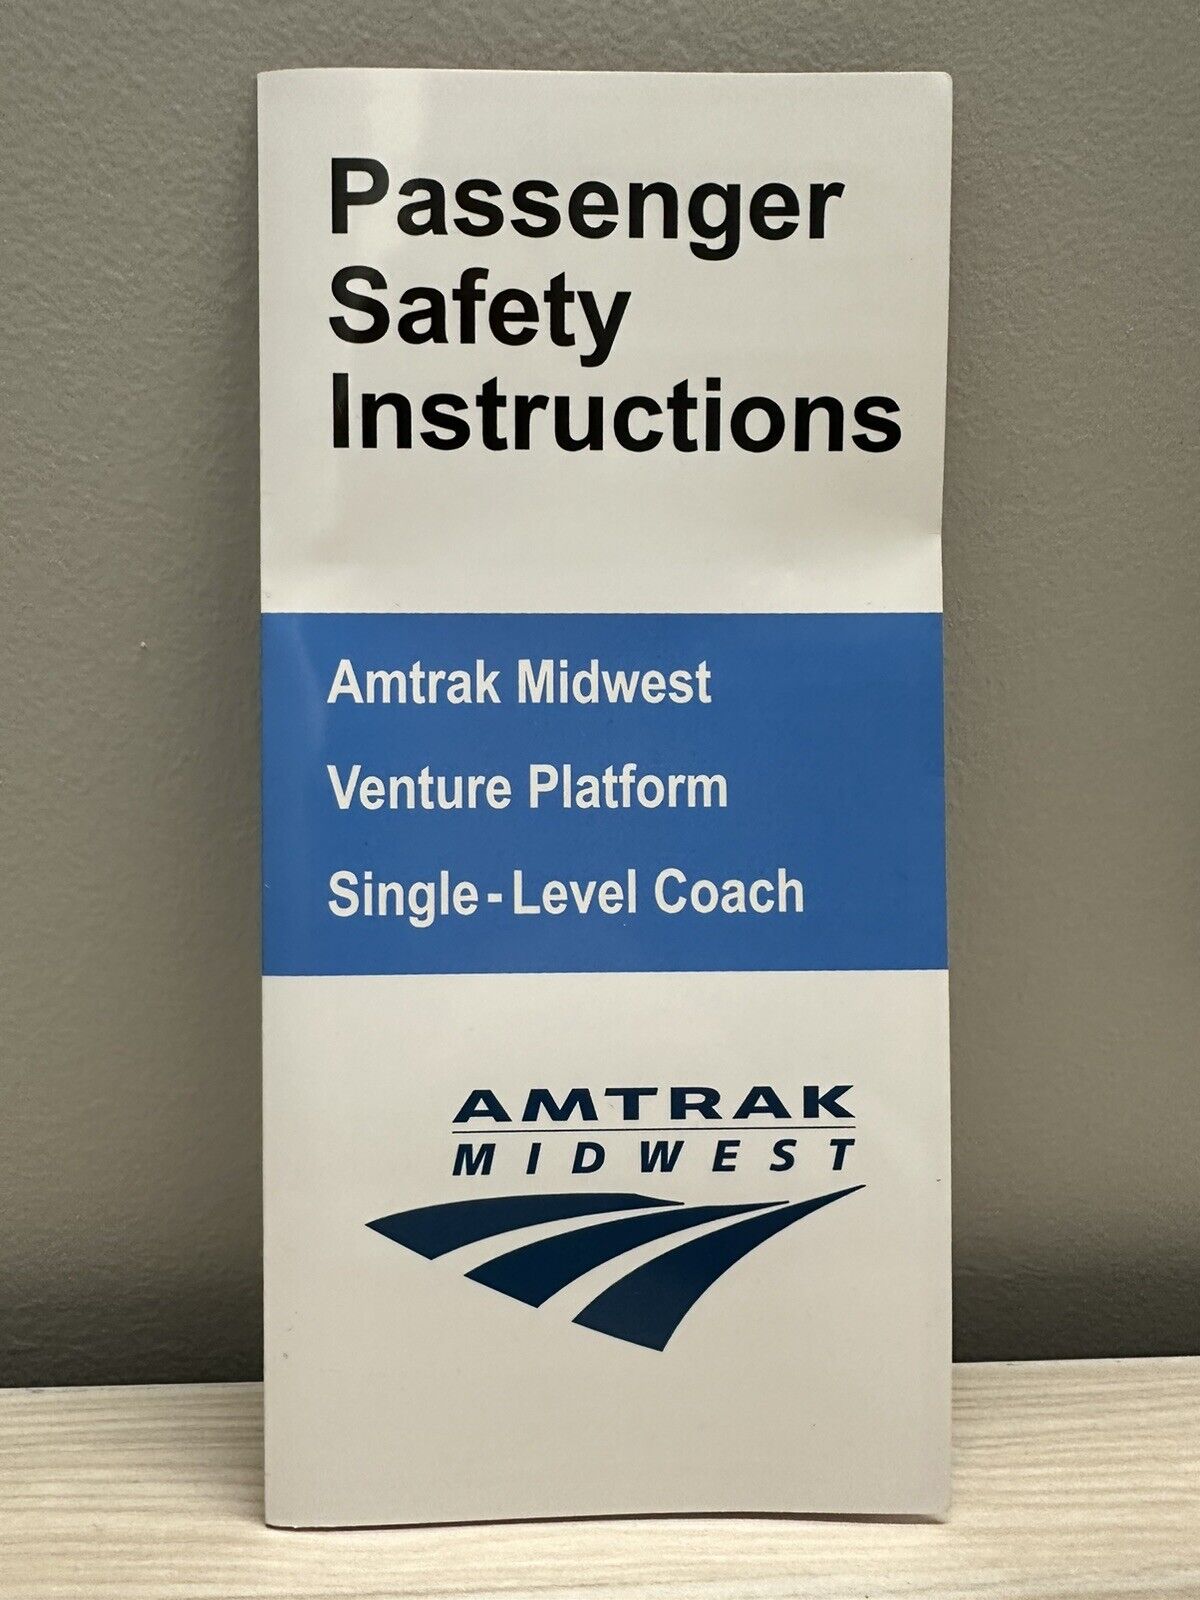 Amtrak Midwest Safety Card